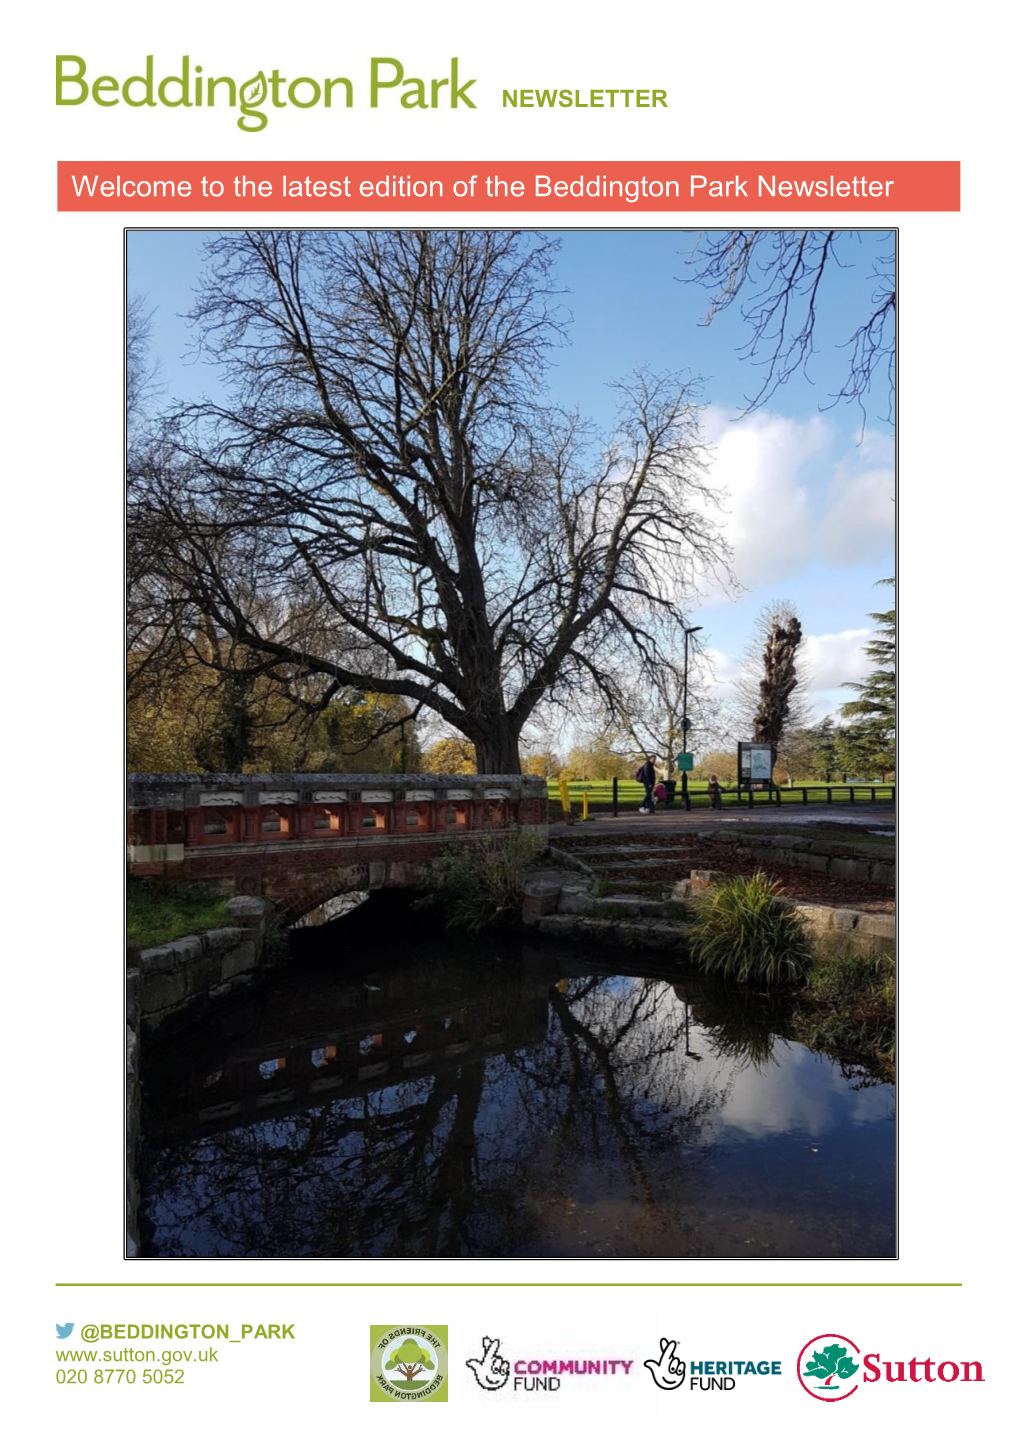 Welcome to the Latest Edition of the Beddington Park Newsletter